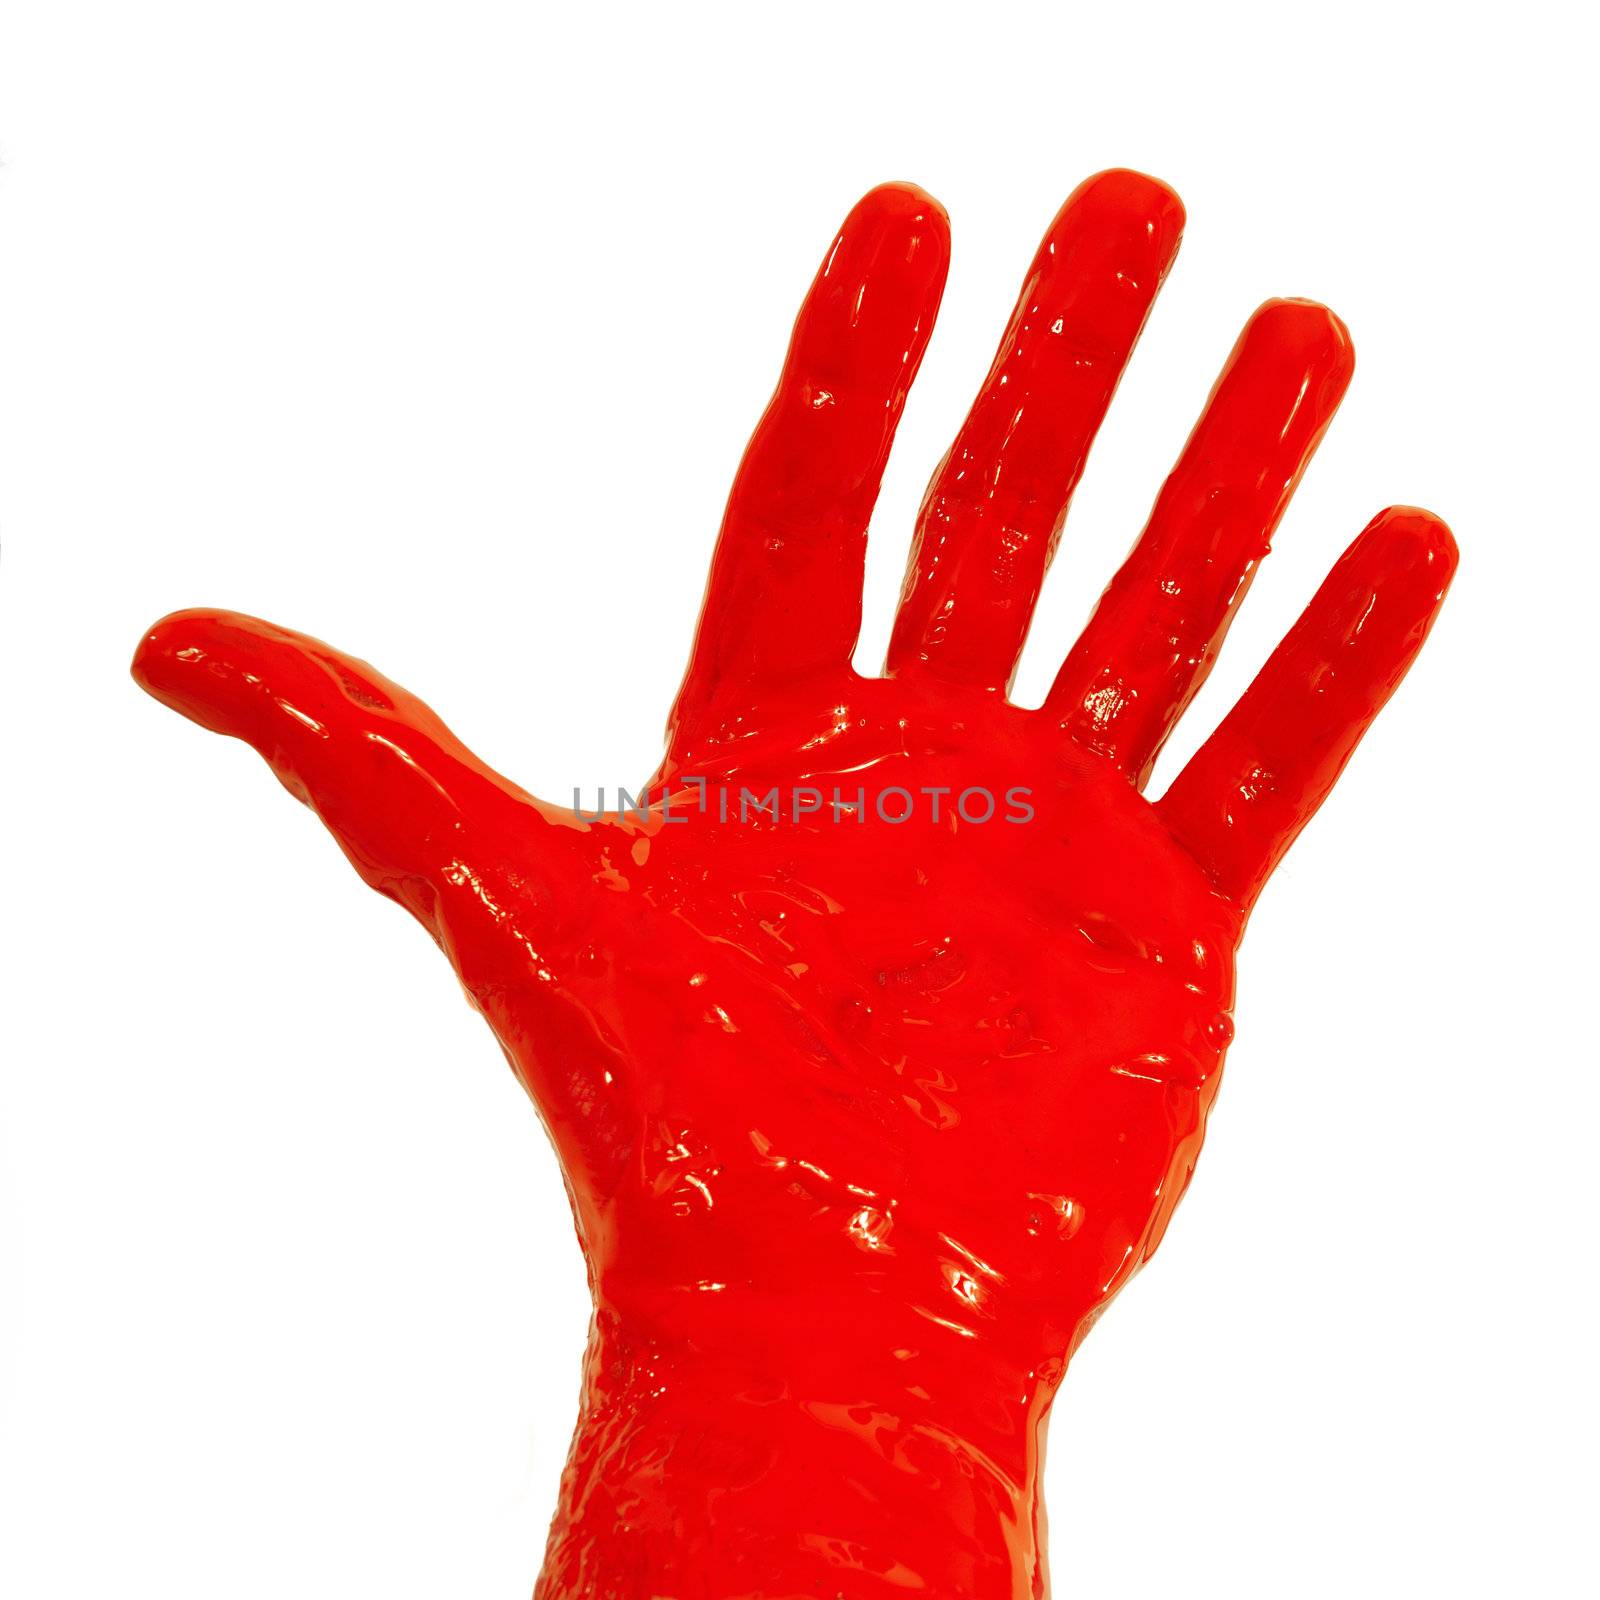 A hand is covered with red paint.